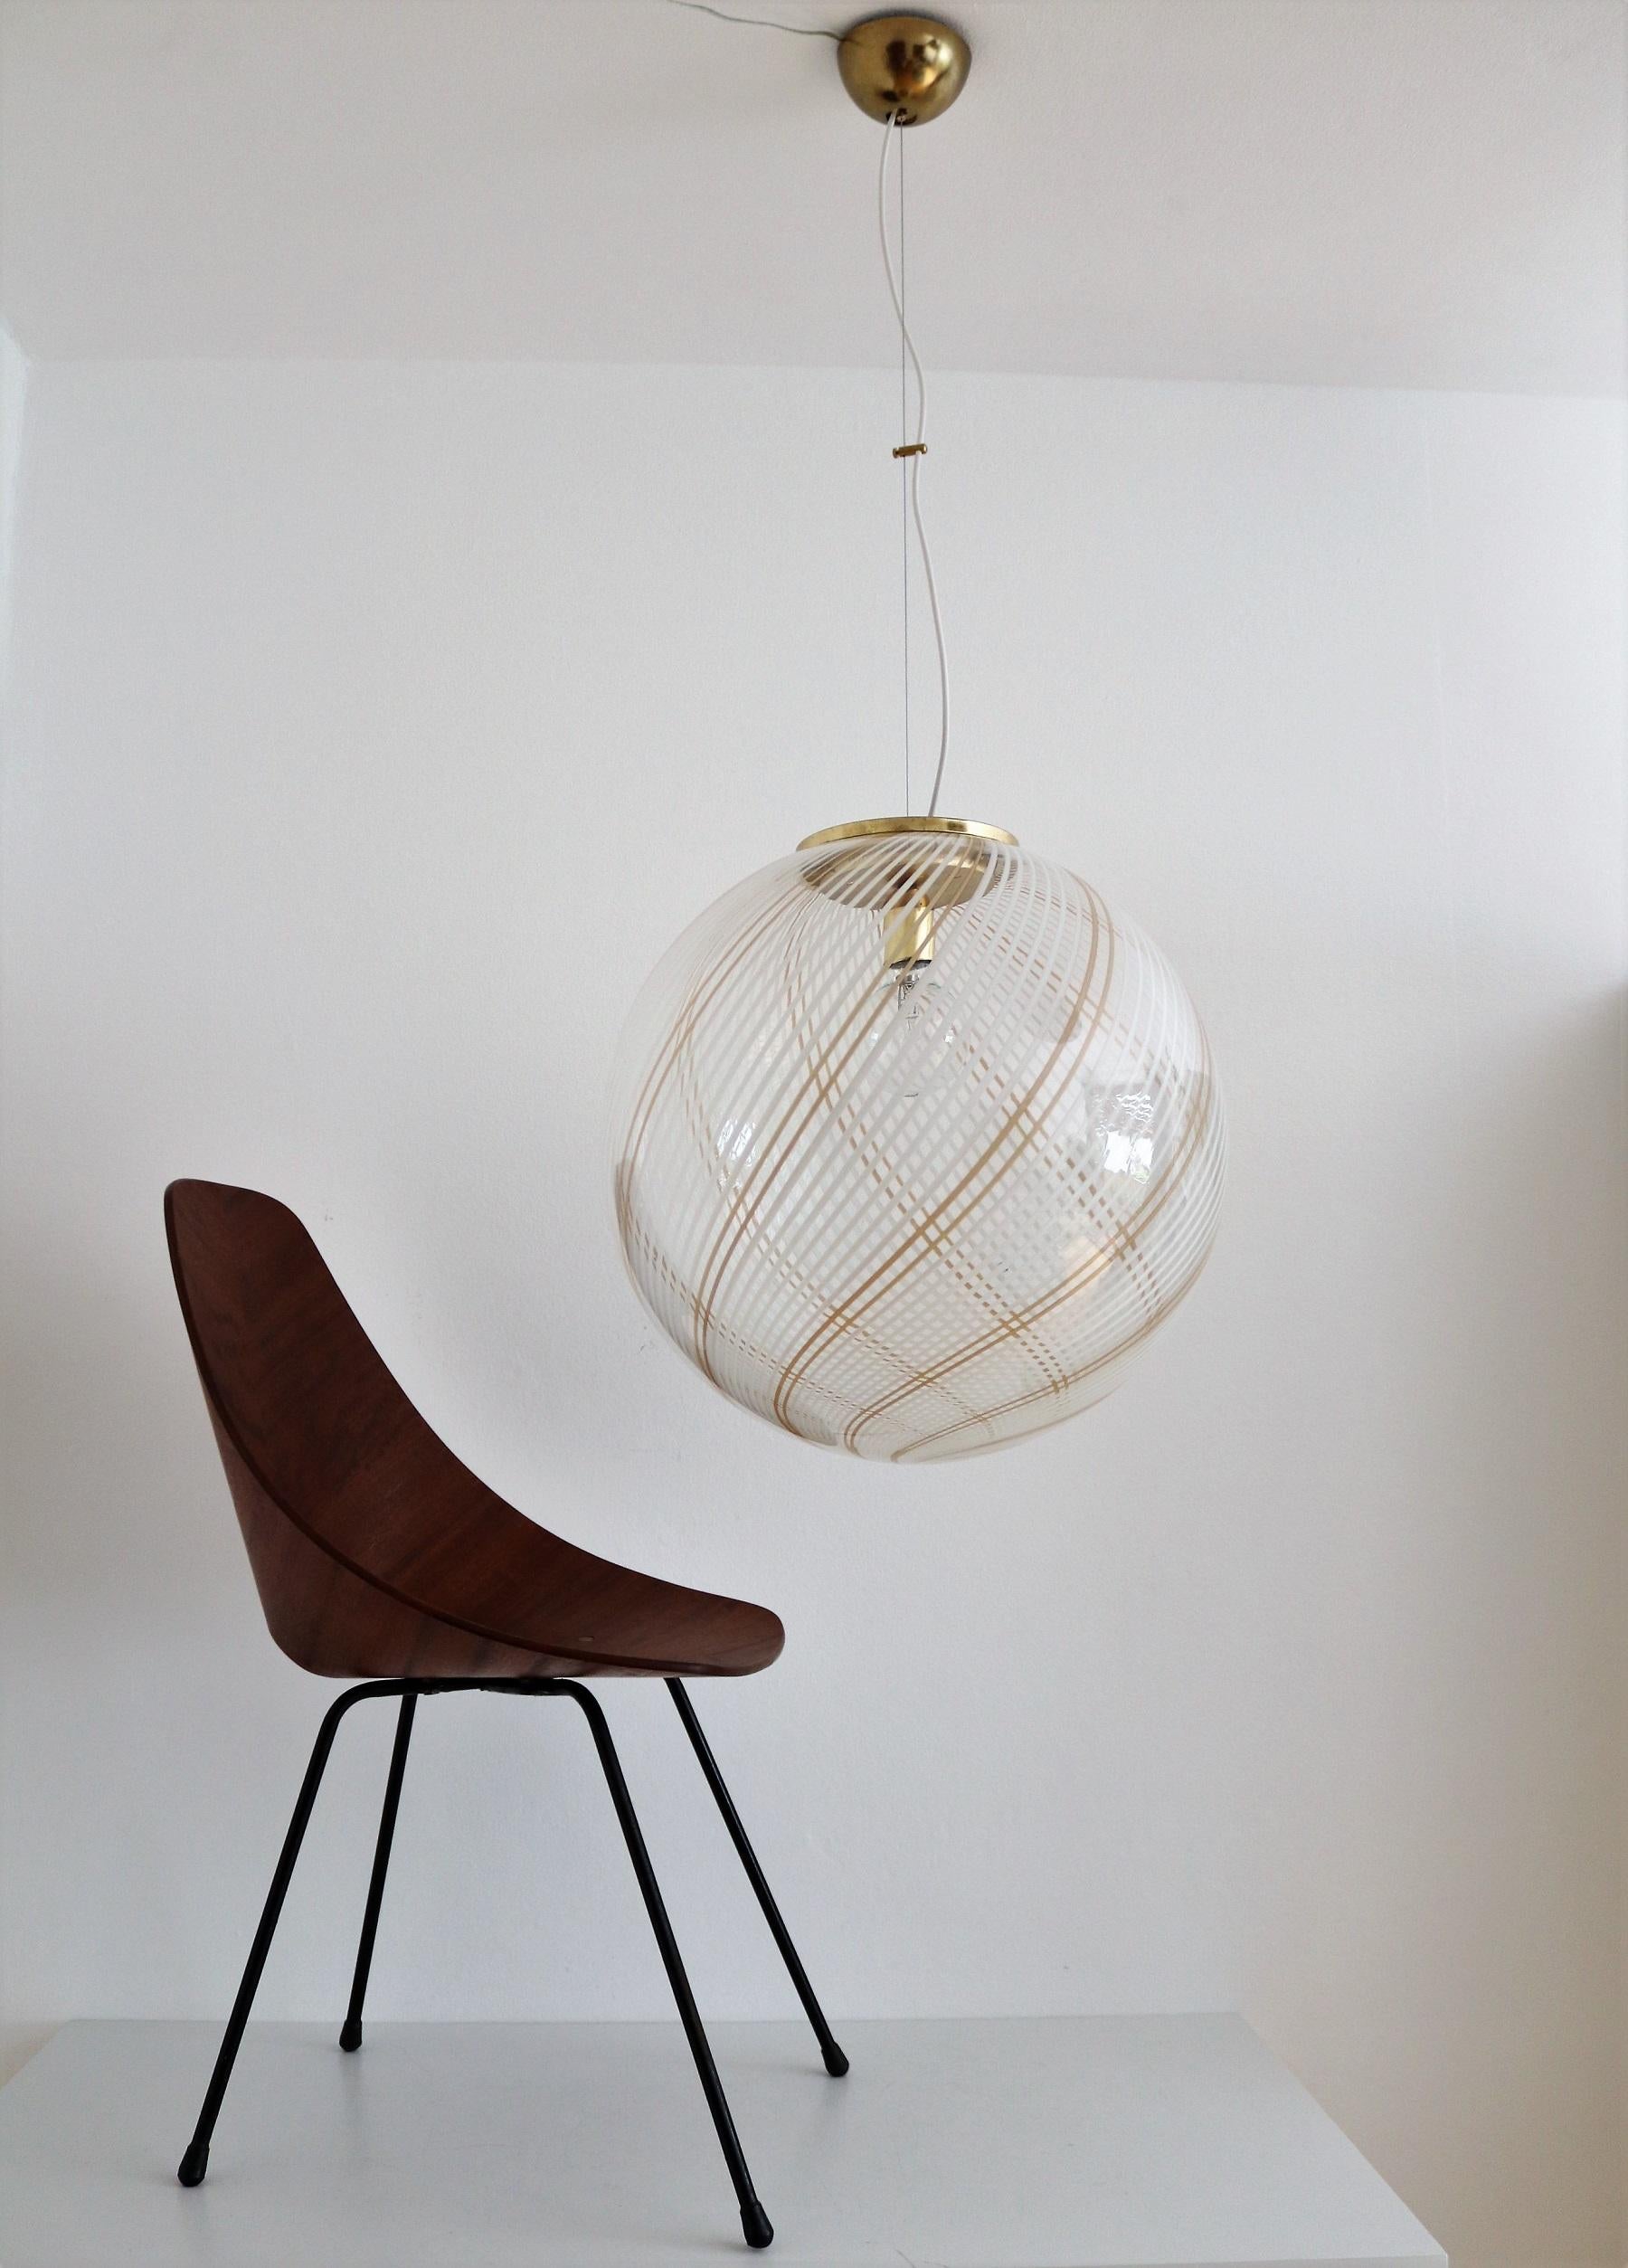 Beautiful and big elegant Murano glass globe pendant lamp with gilt metal details.
The diameter of the glass is 50cm / 20inches! 
The drop height is actually 120cm (47,2in), adjustable.
Made in Murano, Italy in the 1970s.
The lamp leaves